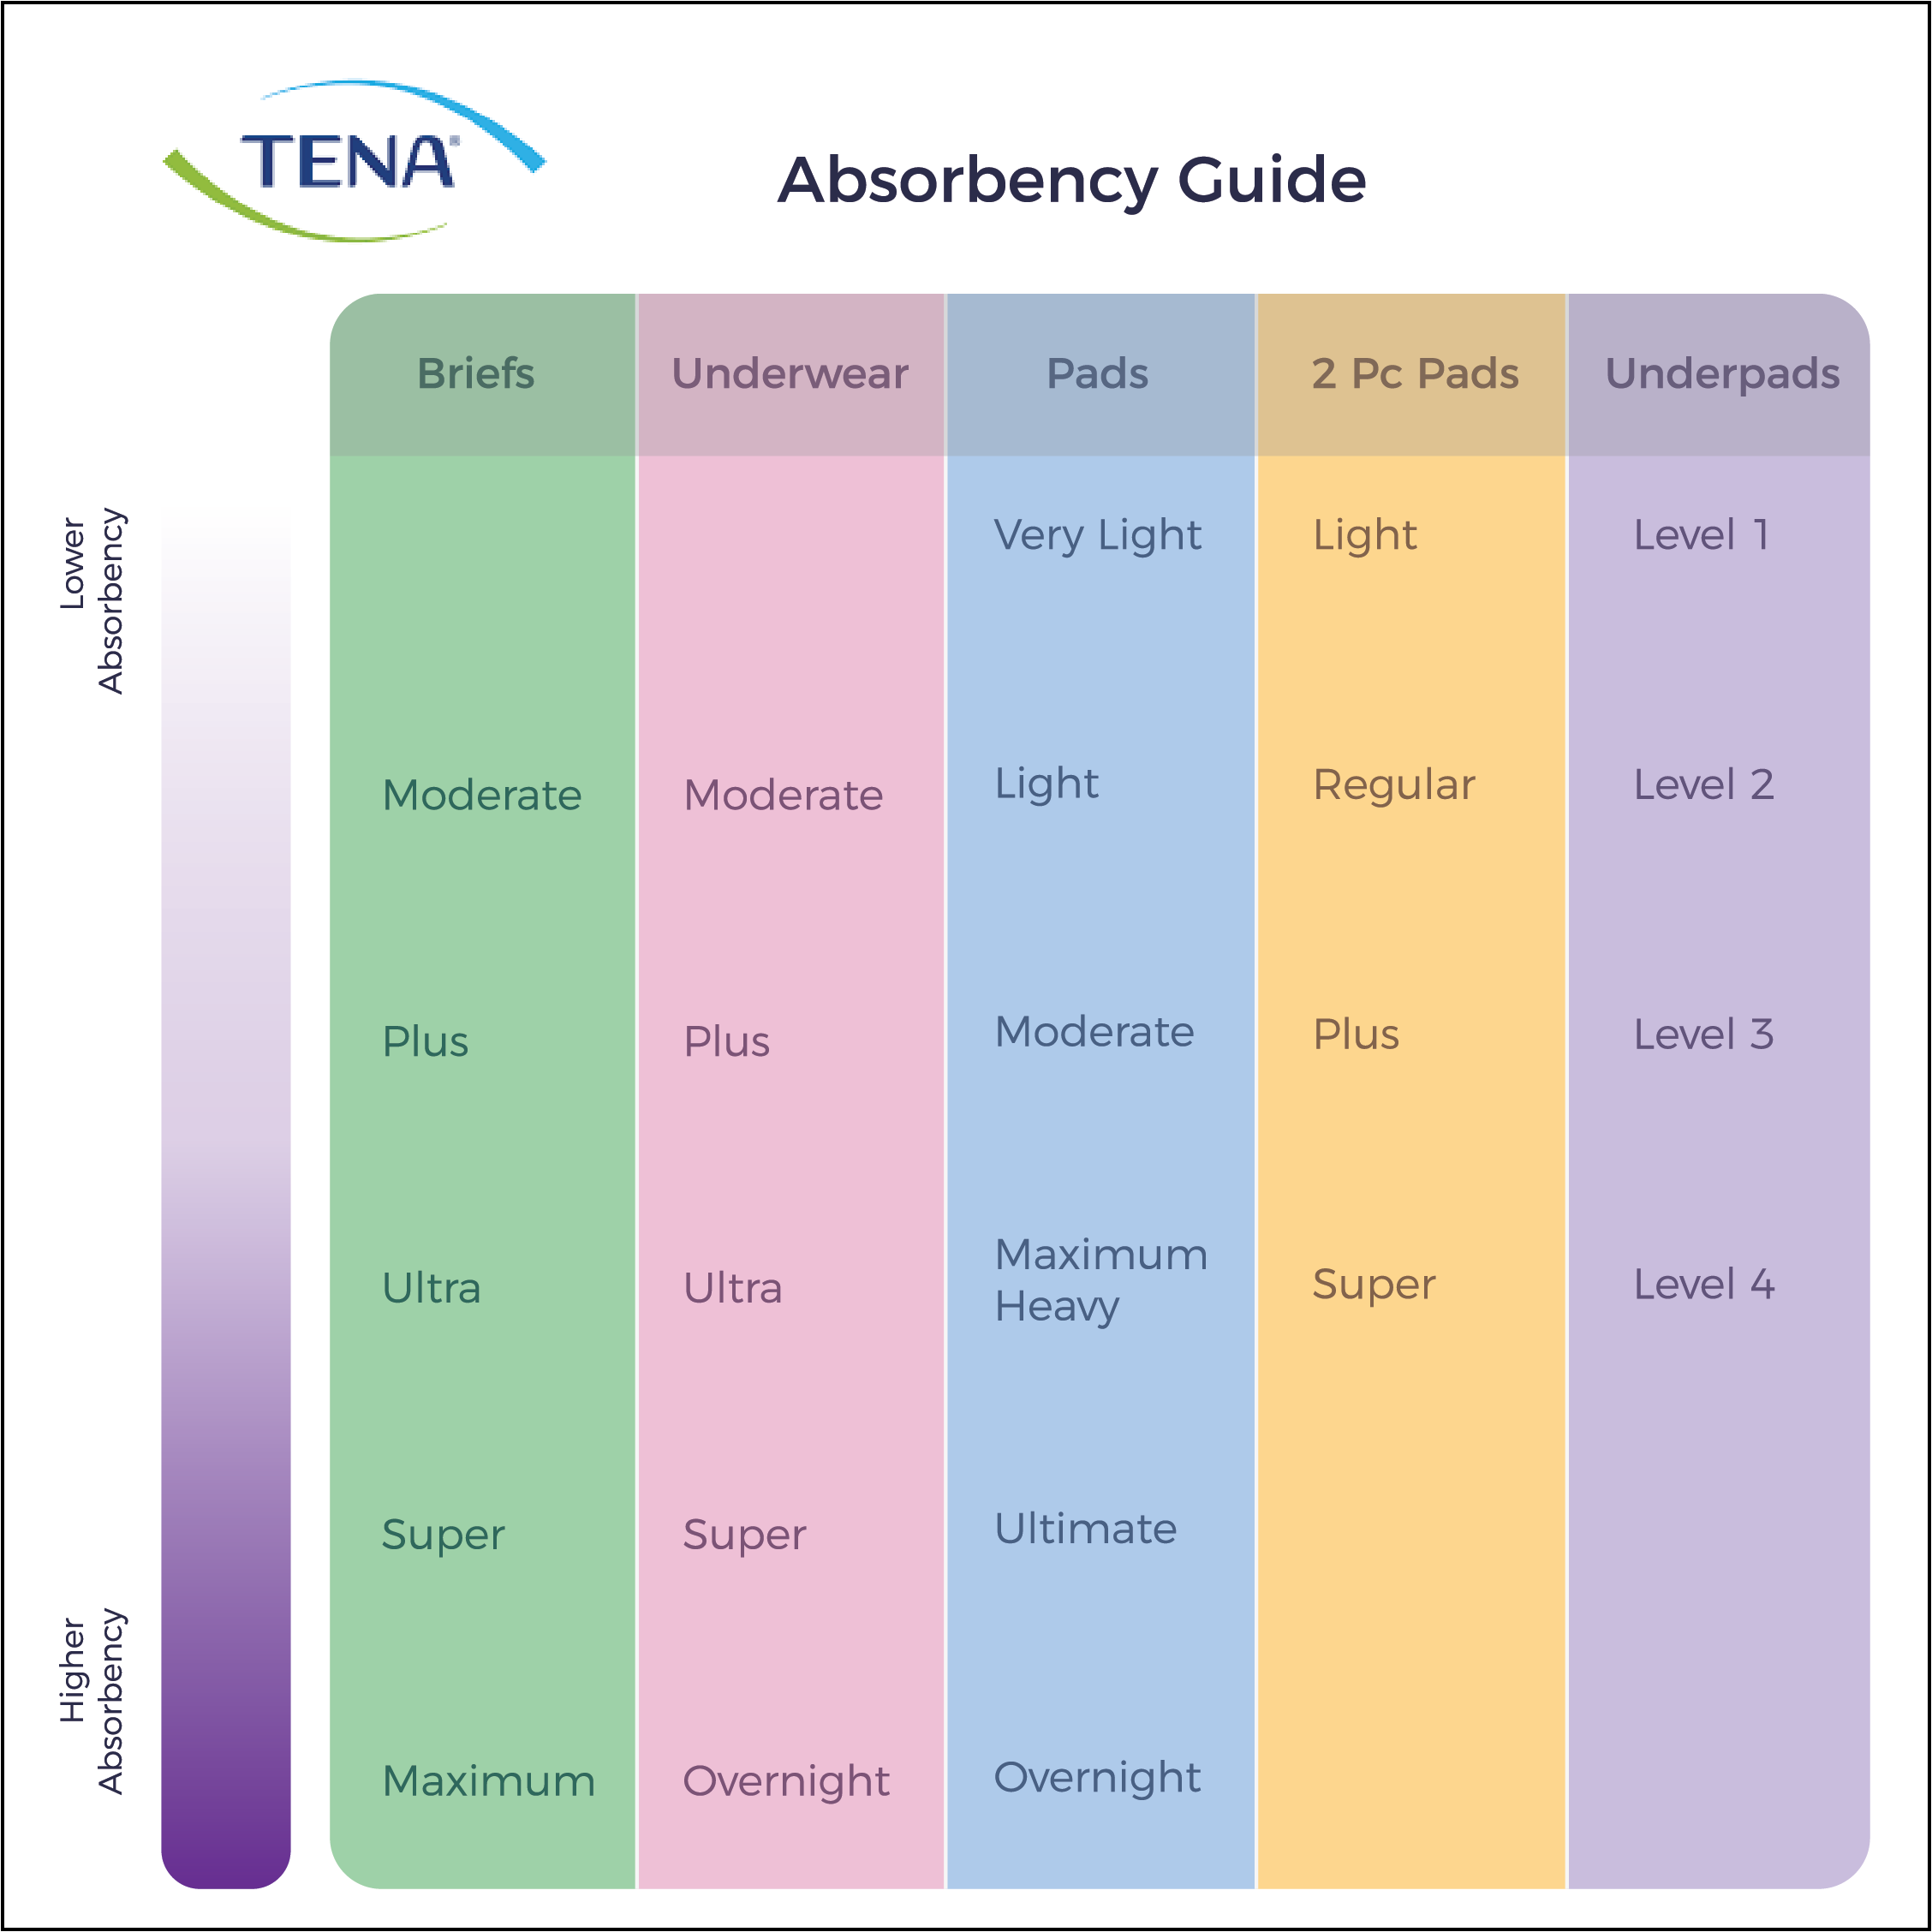 TENA Complete +Care Incontinence Adult Diapers, Moderate Absorbency